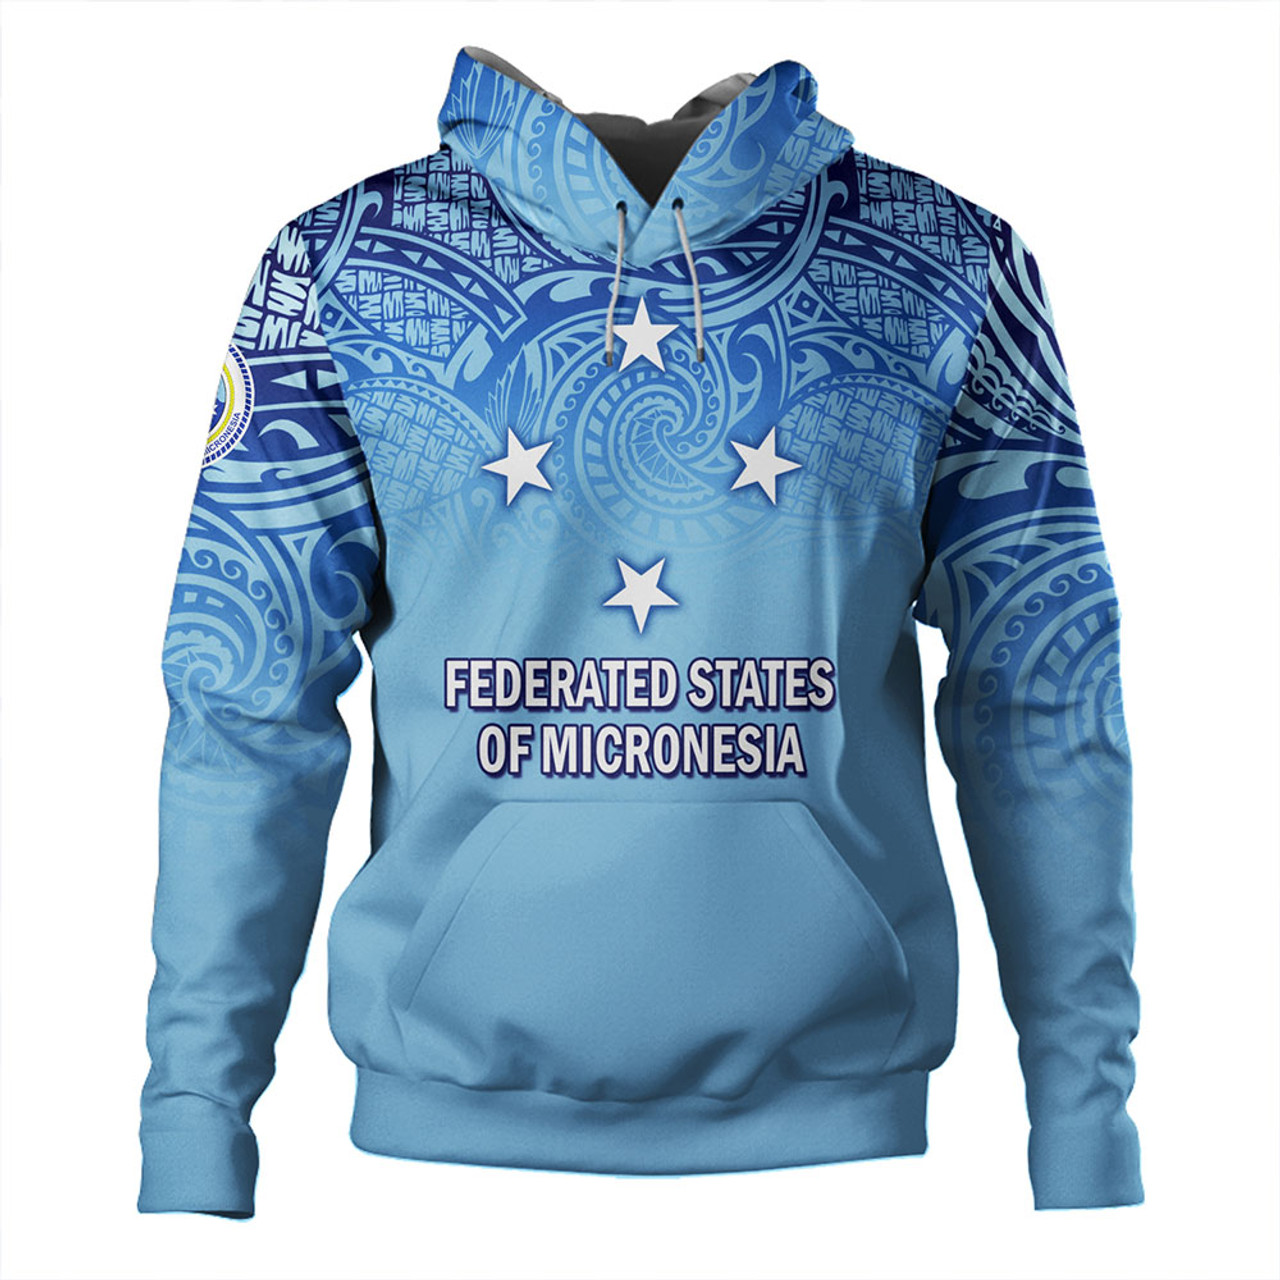 Federated States Of Micronesia Hoodie - Flag Color With Traditional Patterns